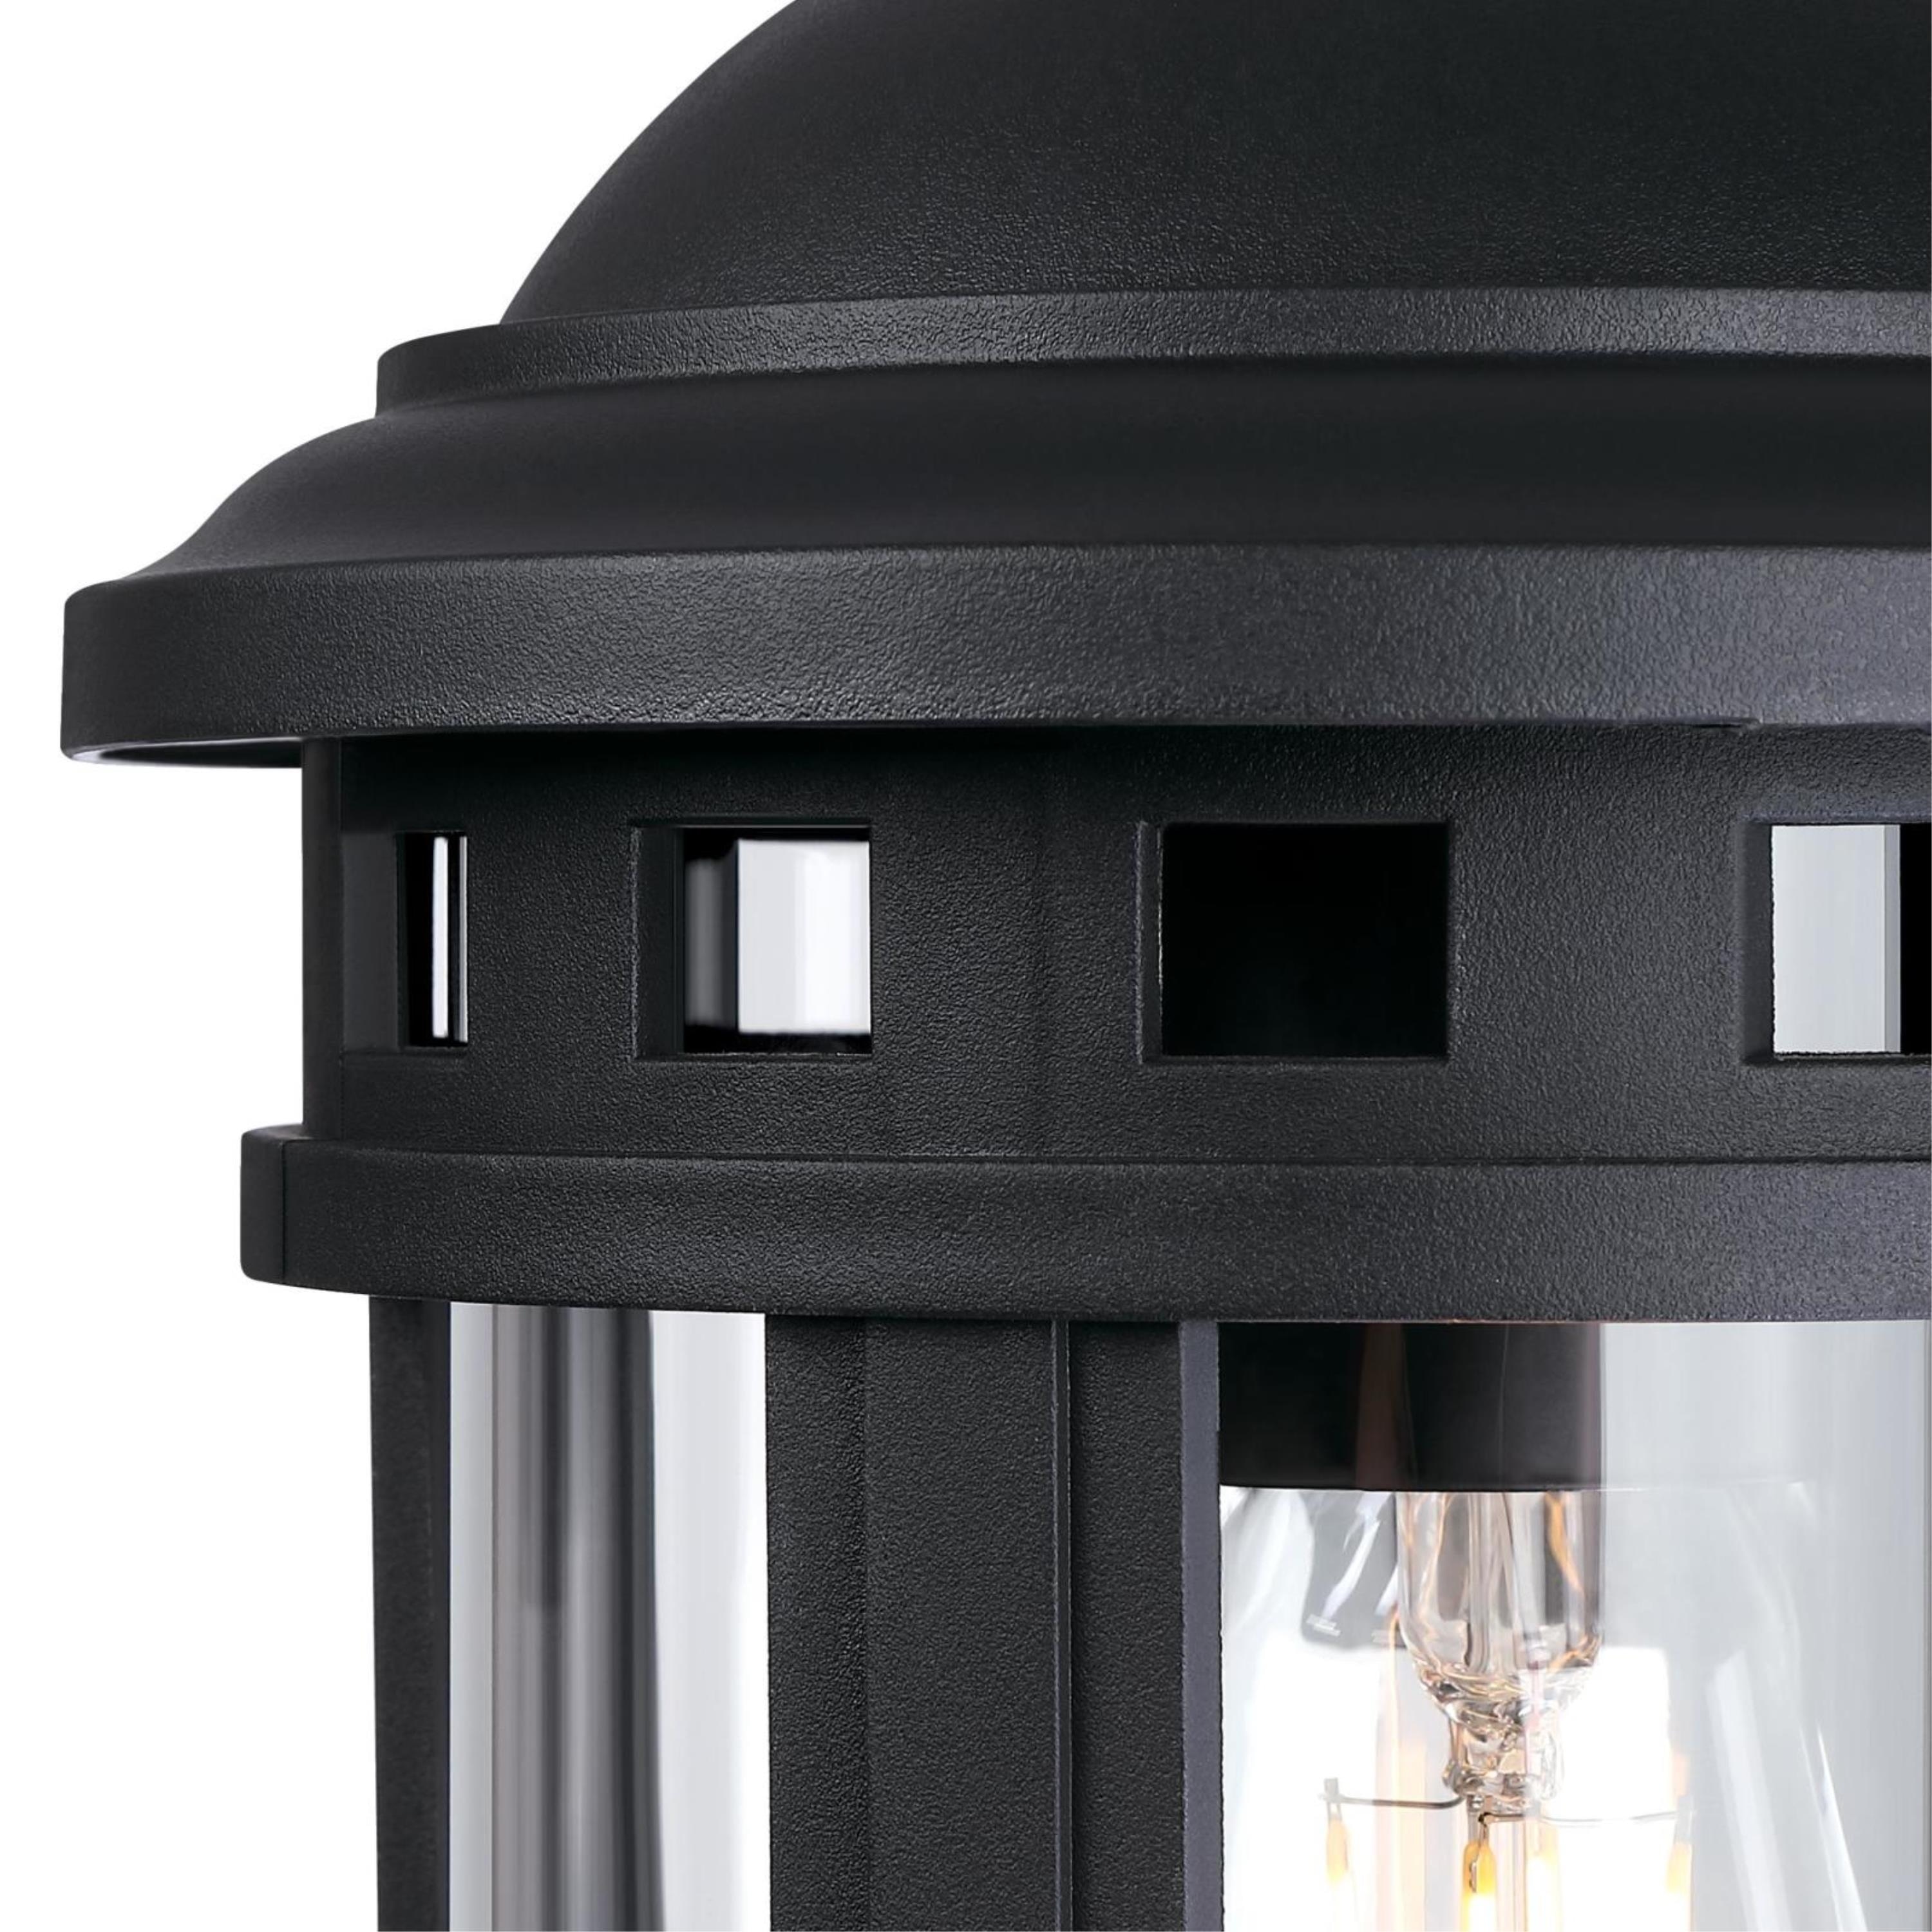 Westinghouse Lighting 6123200 Belon Outdoor Wall Fixture with Dusk to Dawn Sensor, Black - image 4 of 5